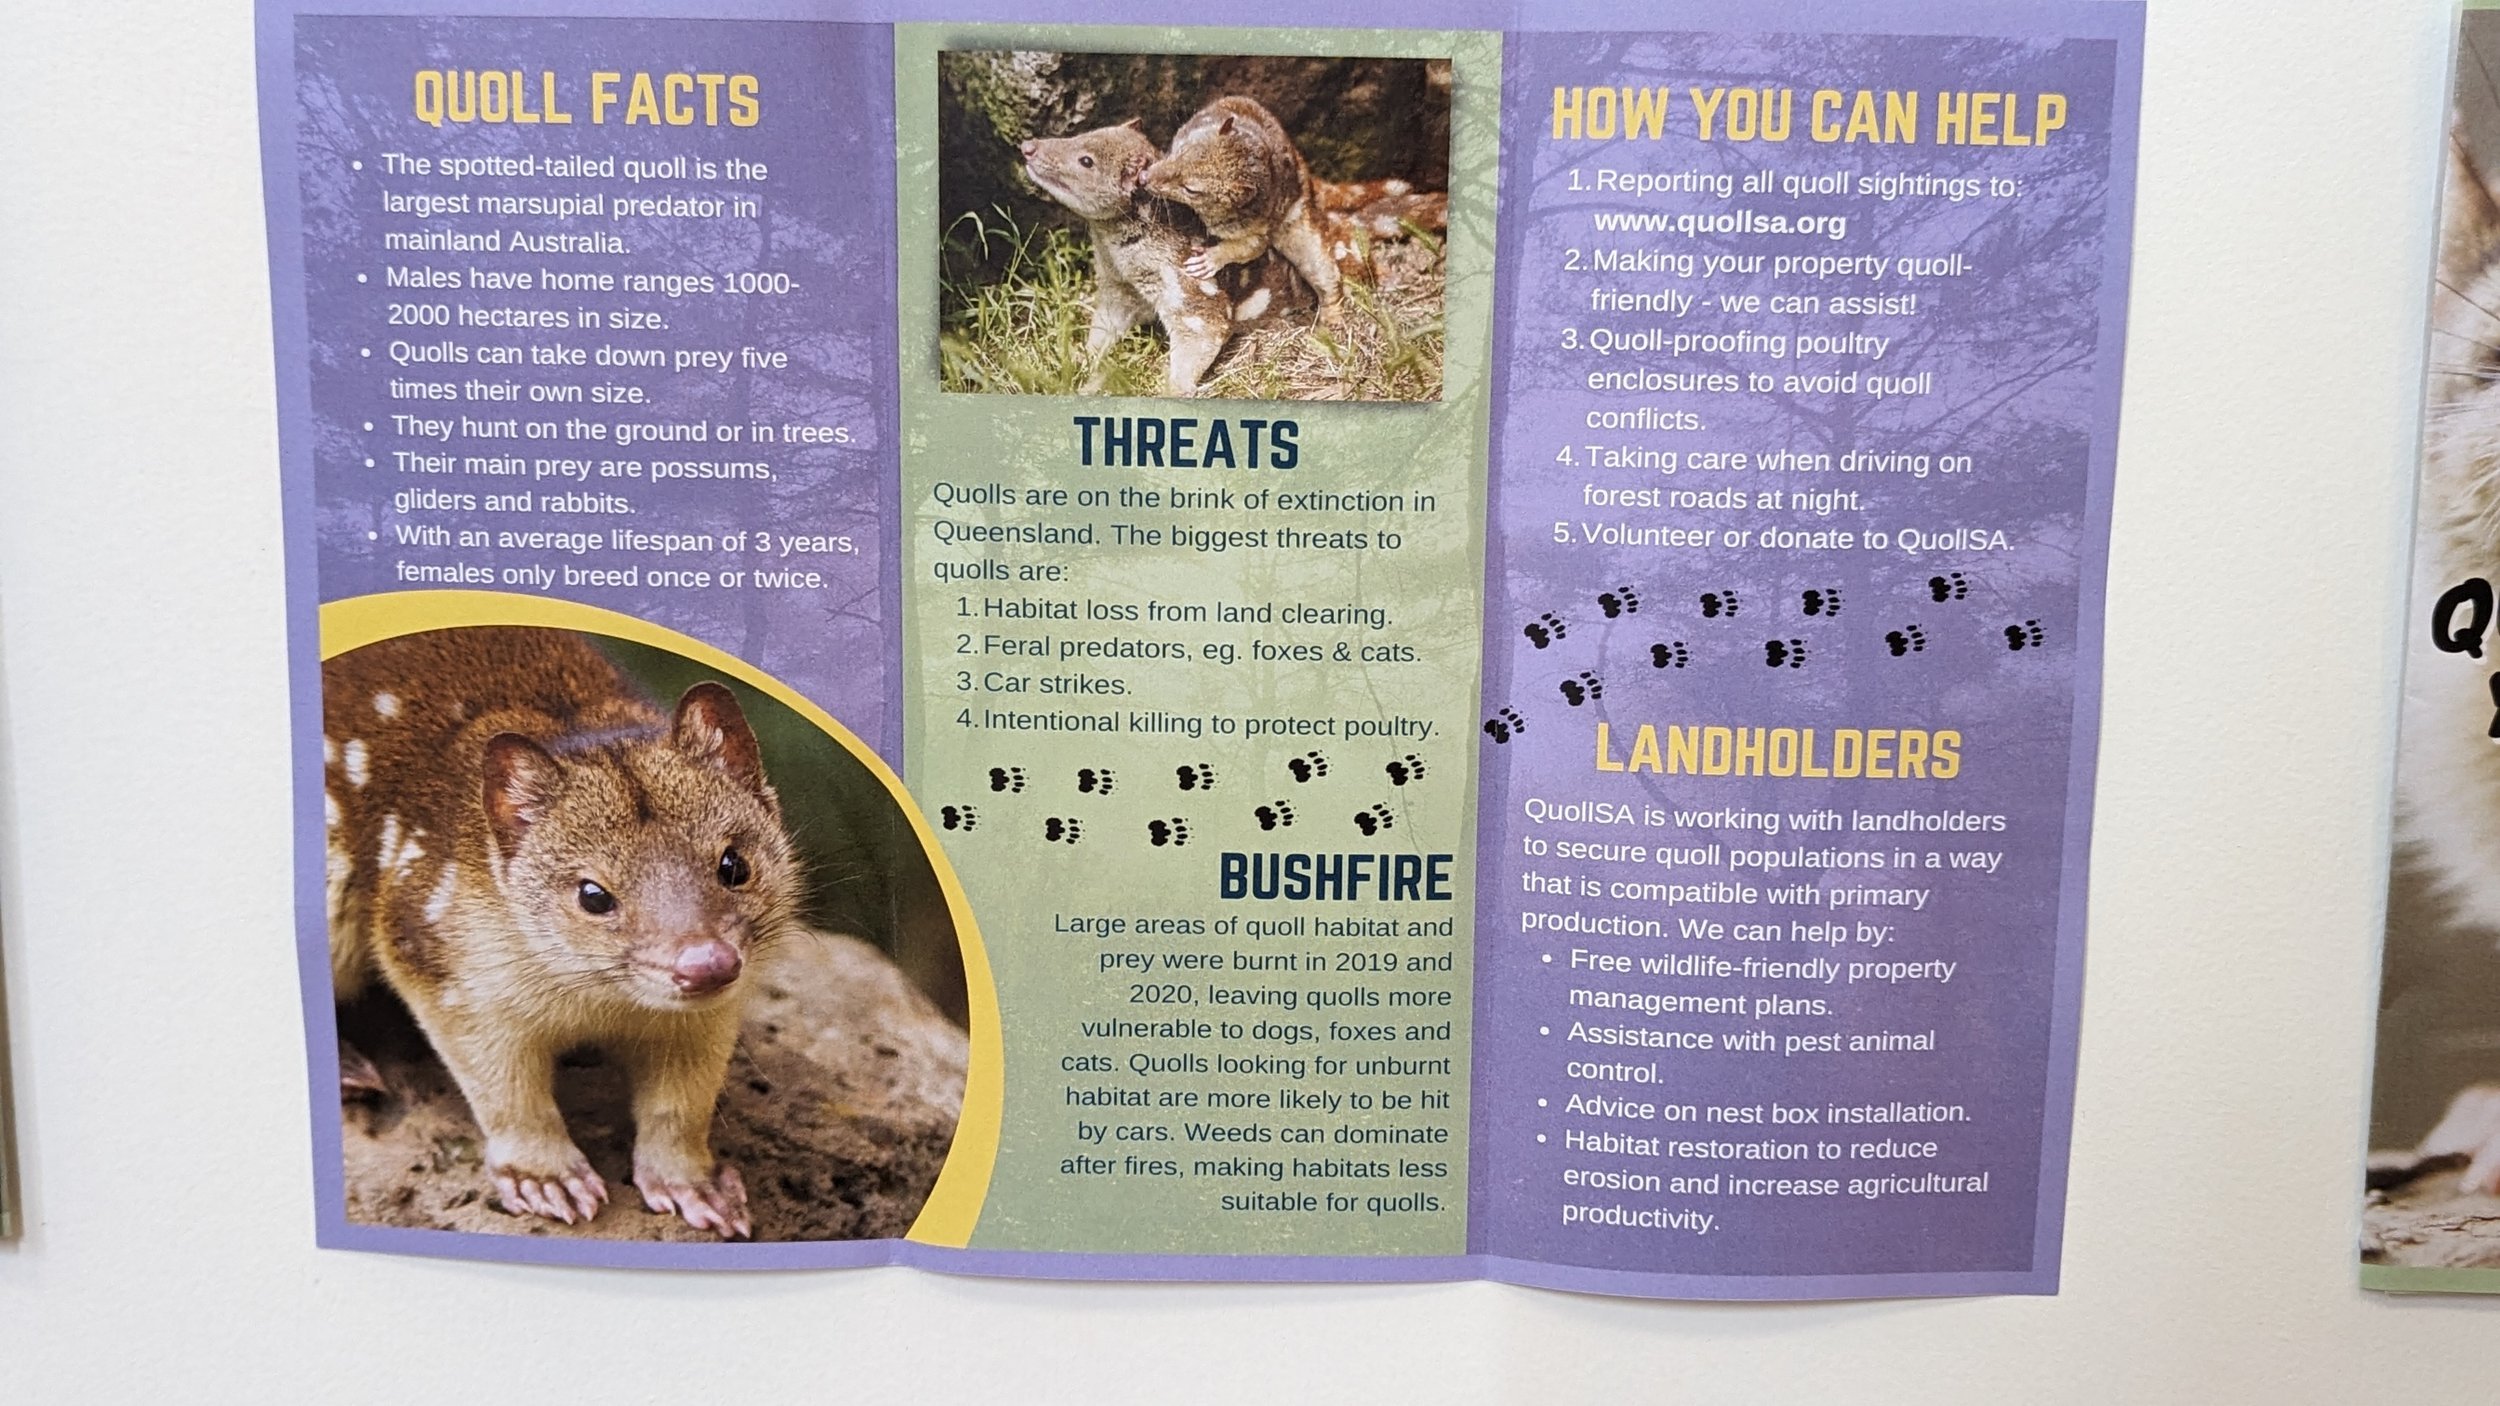 Quoll facts